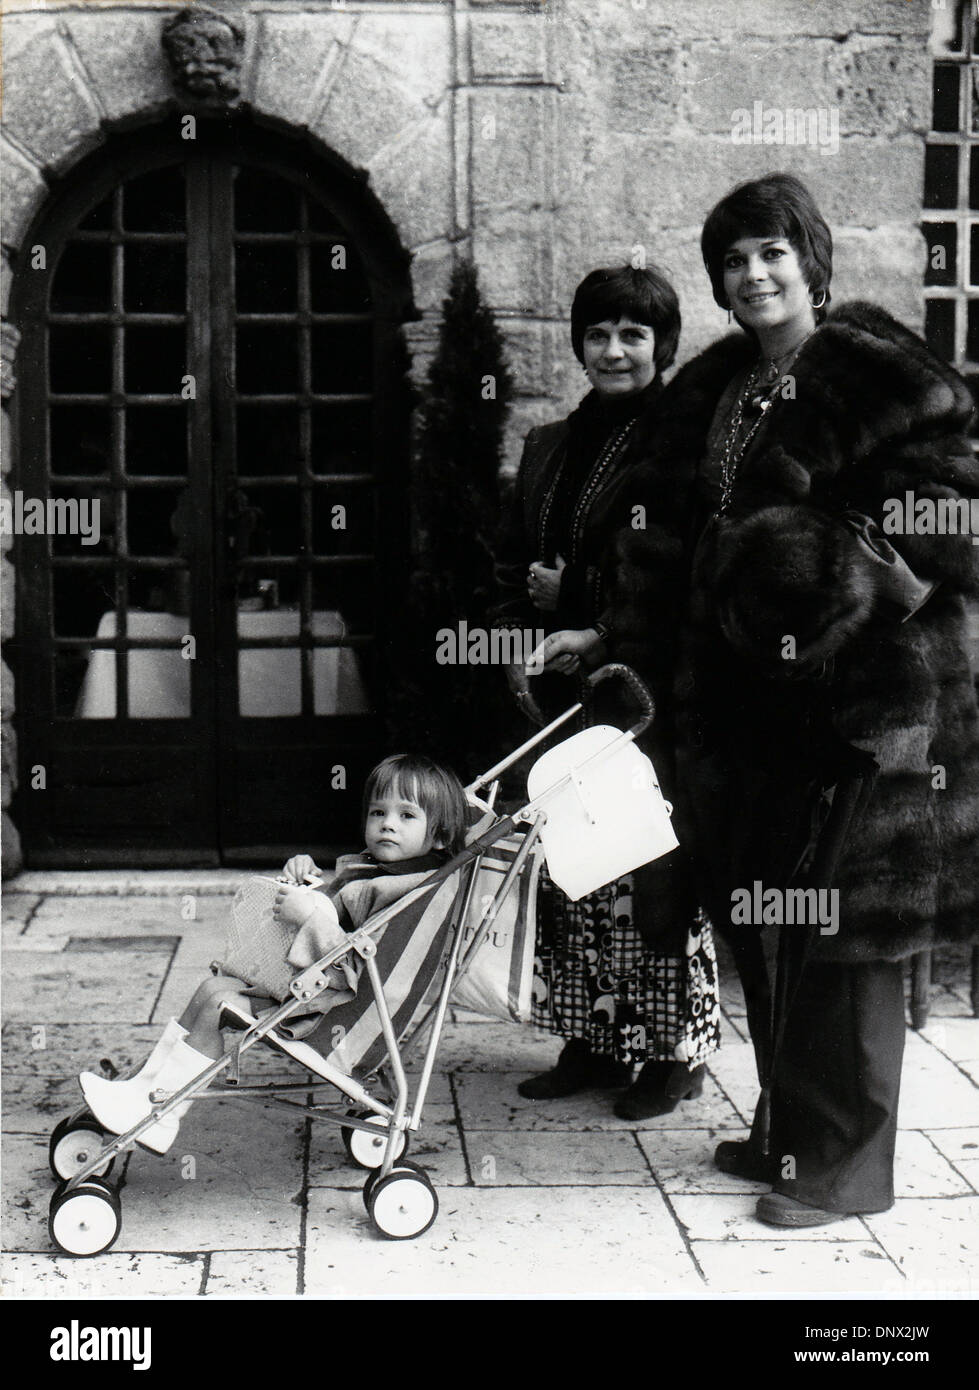 Dec. 27, 1973 - Saint-Paul, France - NATALIE WOOD (July 20, 1938 - November 29, 1981) was an award winning American actress. PICTURED: Wood vacation in Saint-Paul with her husband Robert and daughter COURTNEY WAGNER. (Credit Image: © KEYSTONE Pictures USA/ZUMAPRESS.com) Stock Photo